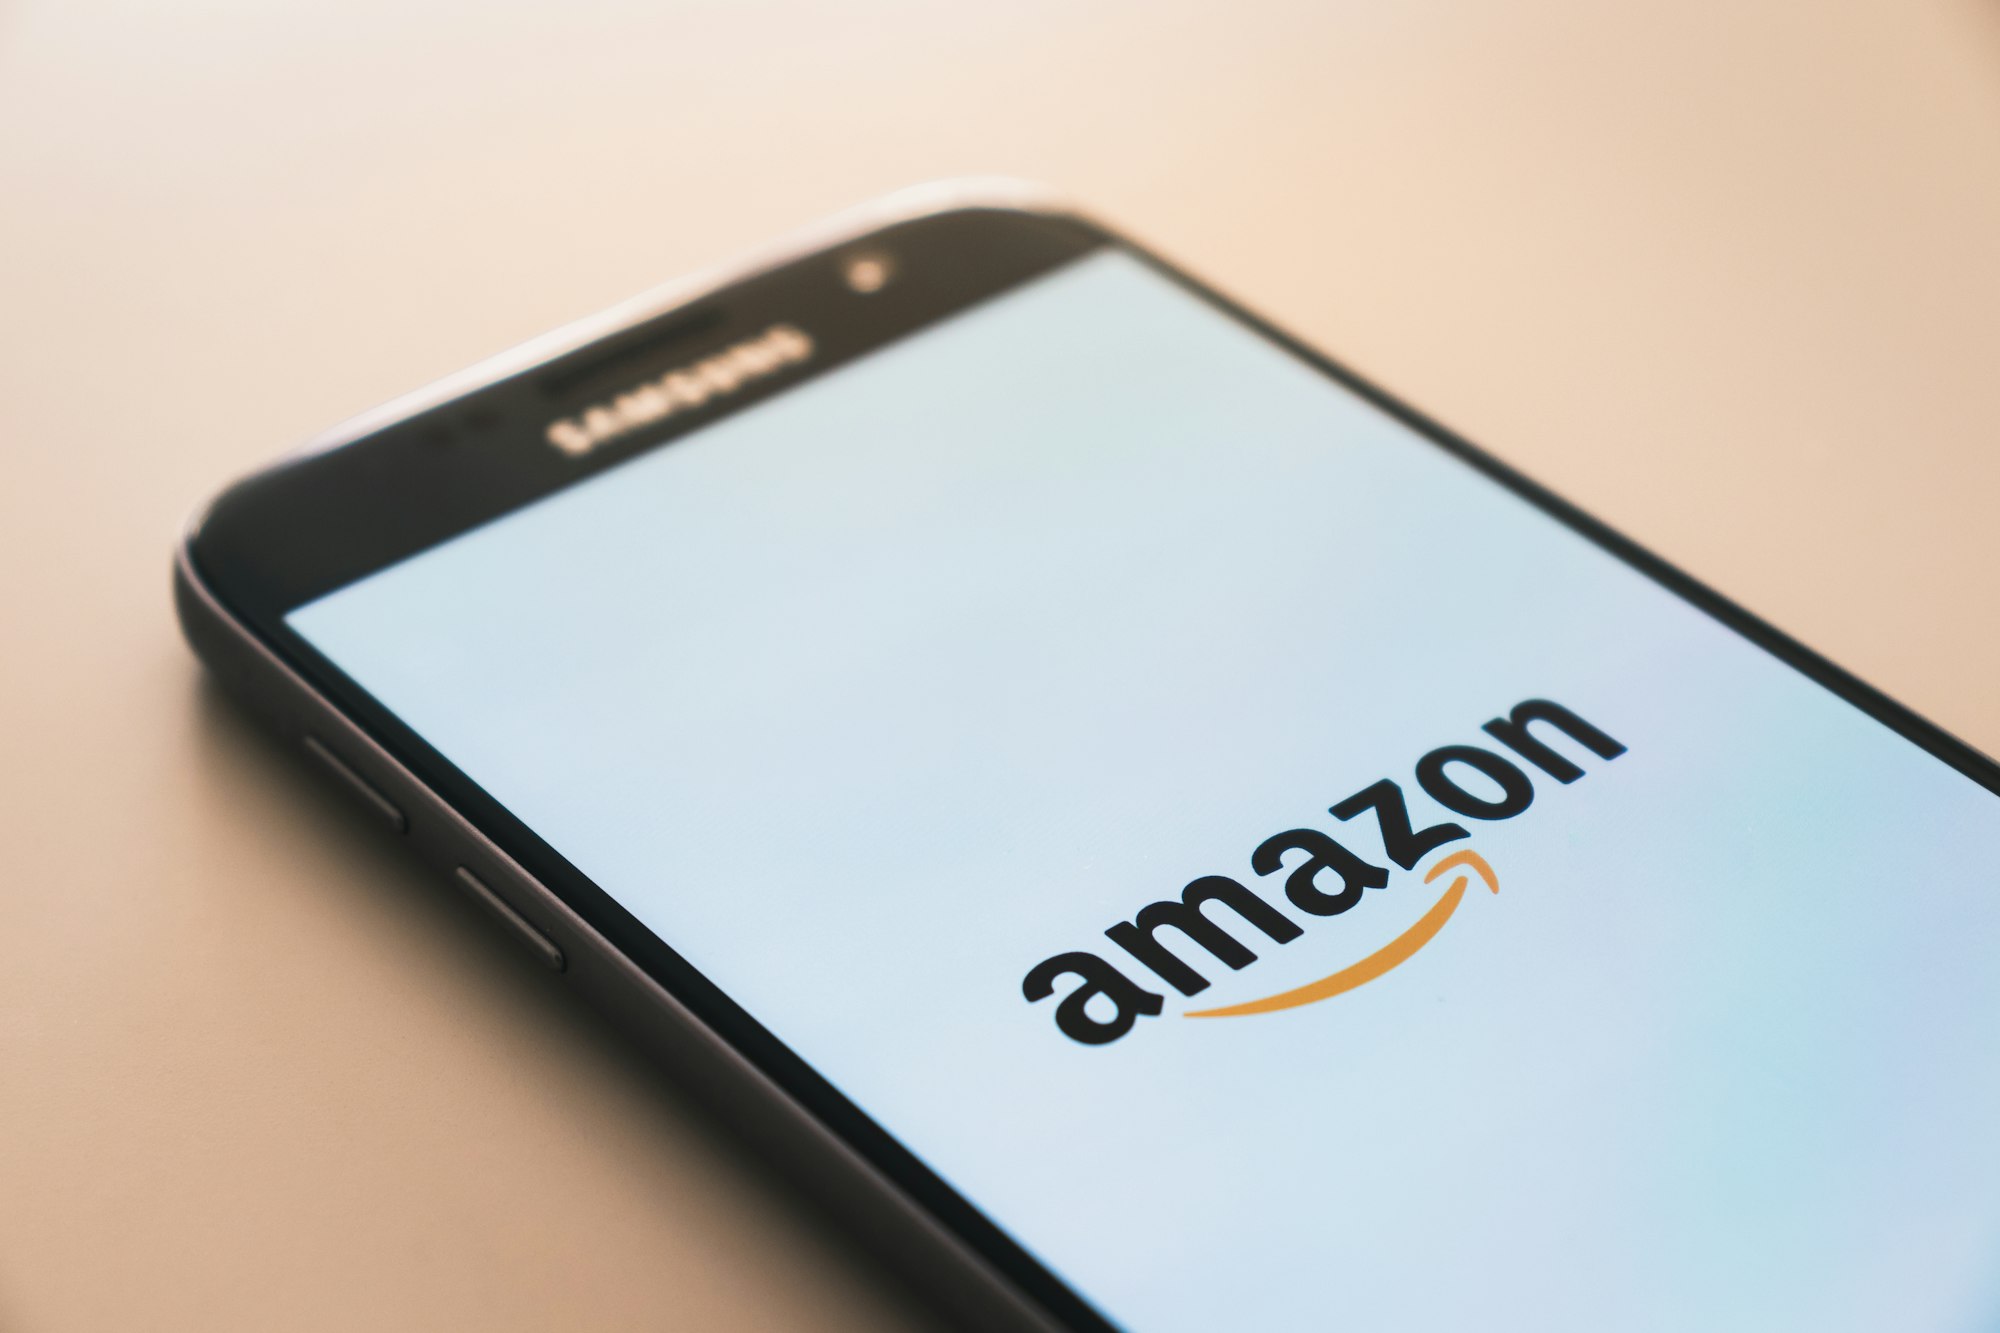 Amazon offers financial assistance to future retail